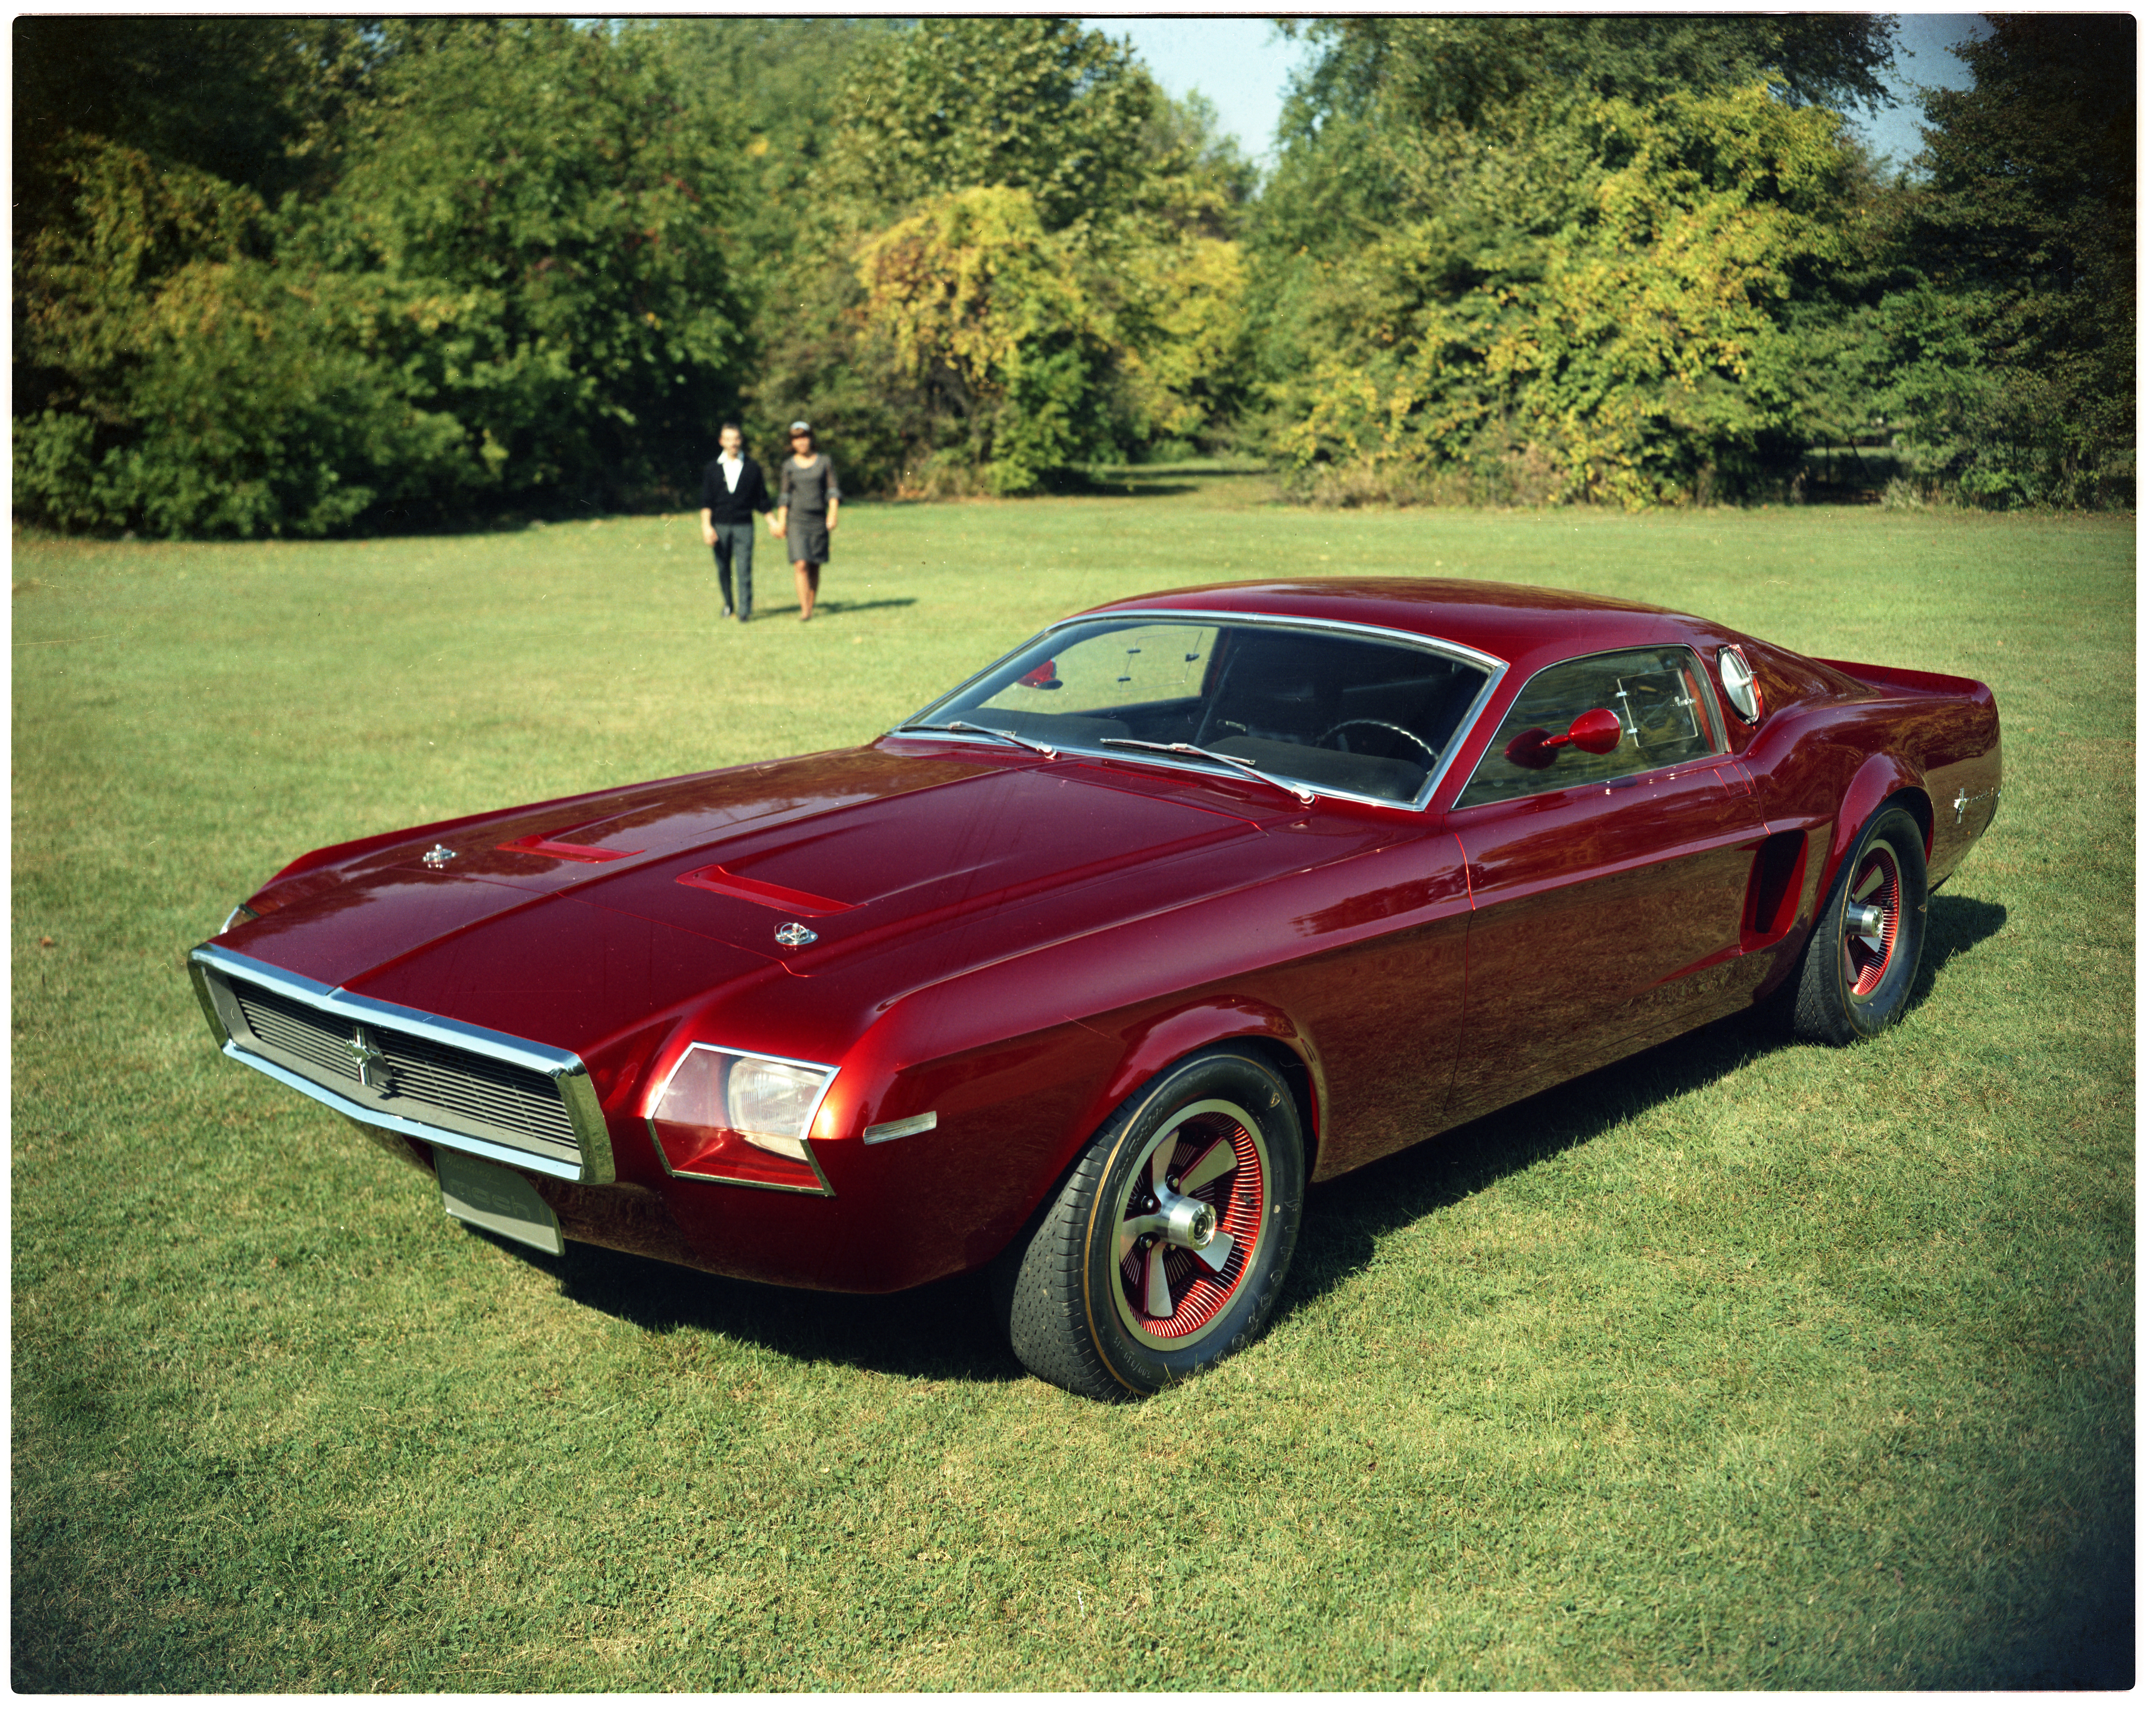 Ford Mustang Mach 1 A Review Of Its History Autoblog